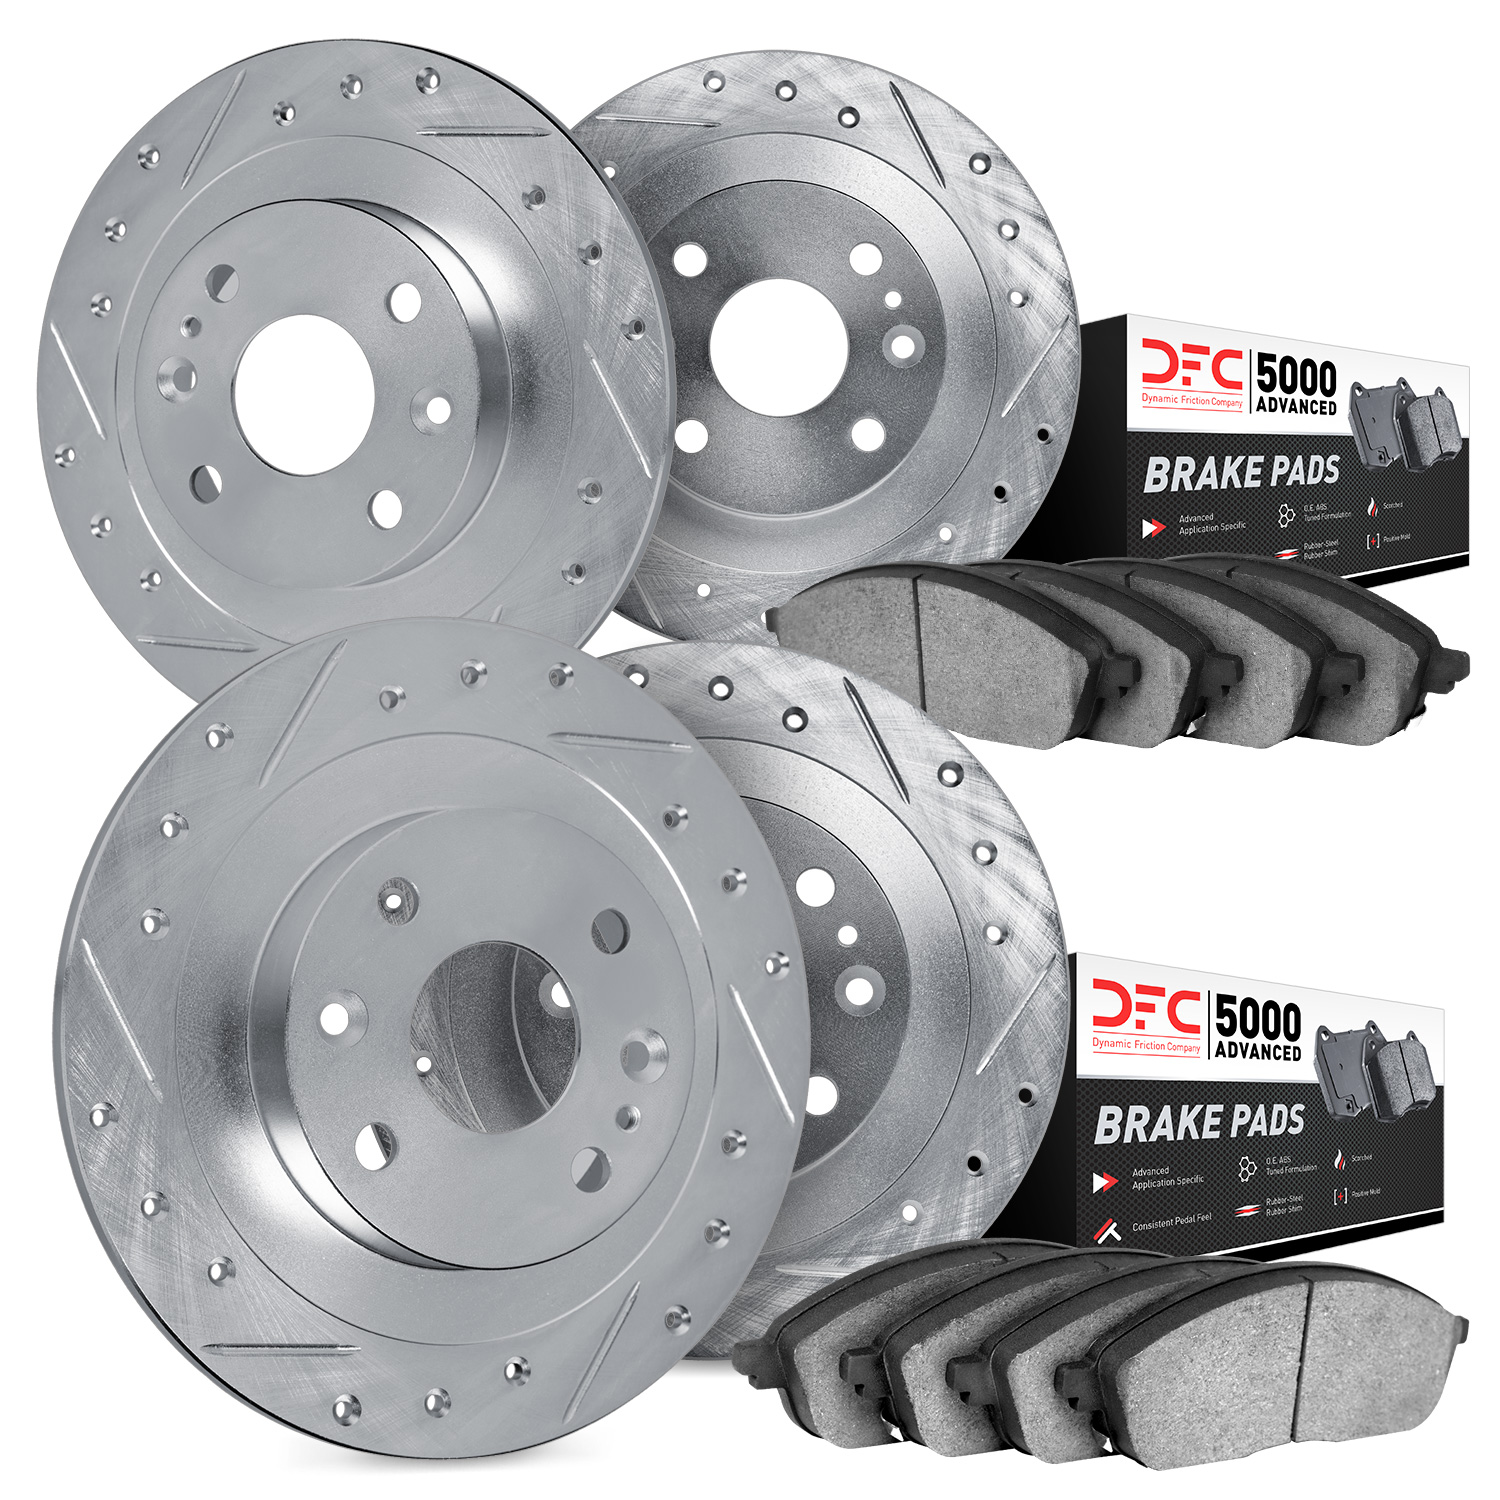 7504-43011 Drilled/Slotted Brake Rotors w/5000 Advanced Brake Pads Kit [Silver], 1976-1980 Mopar, Position: Front and Rear